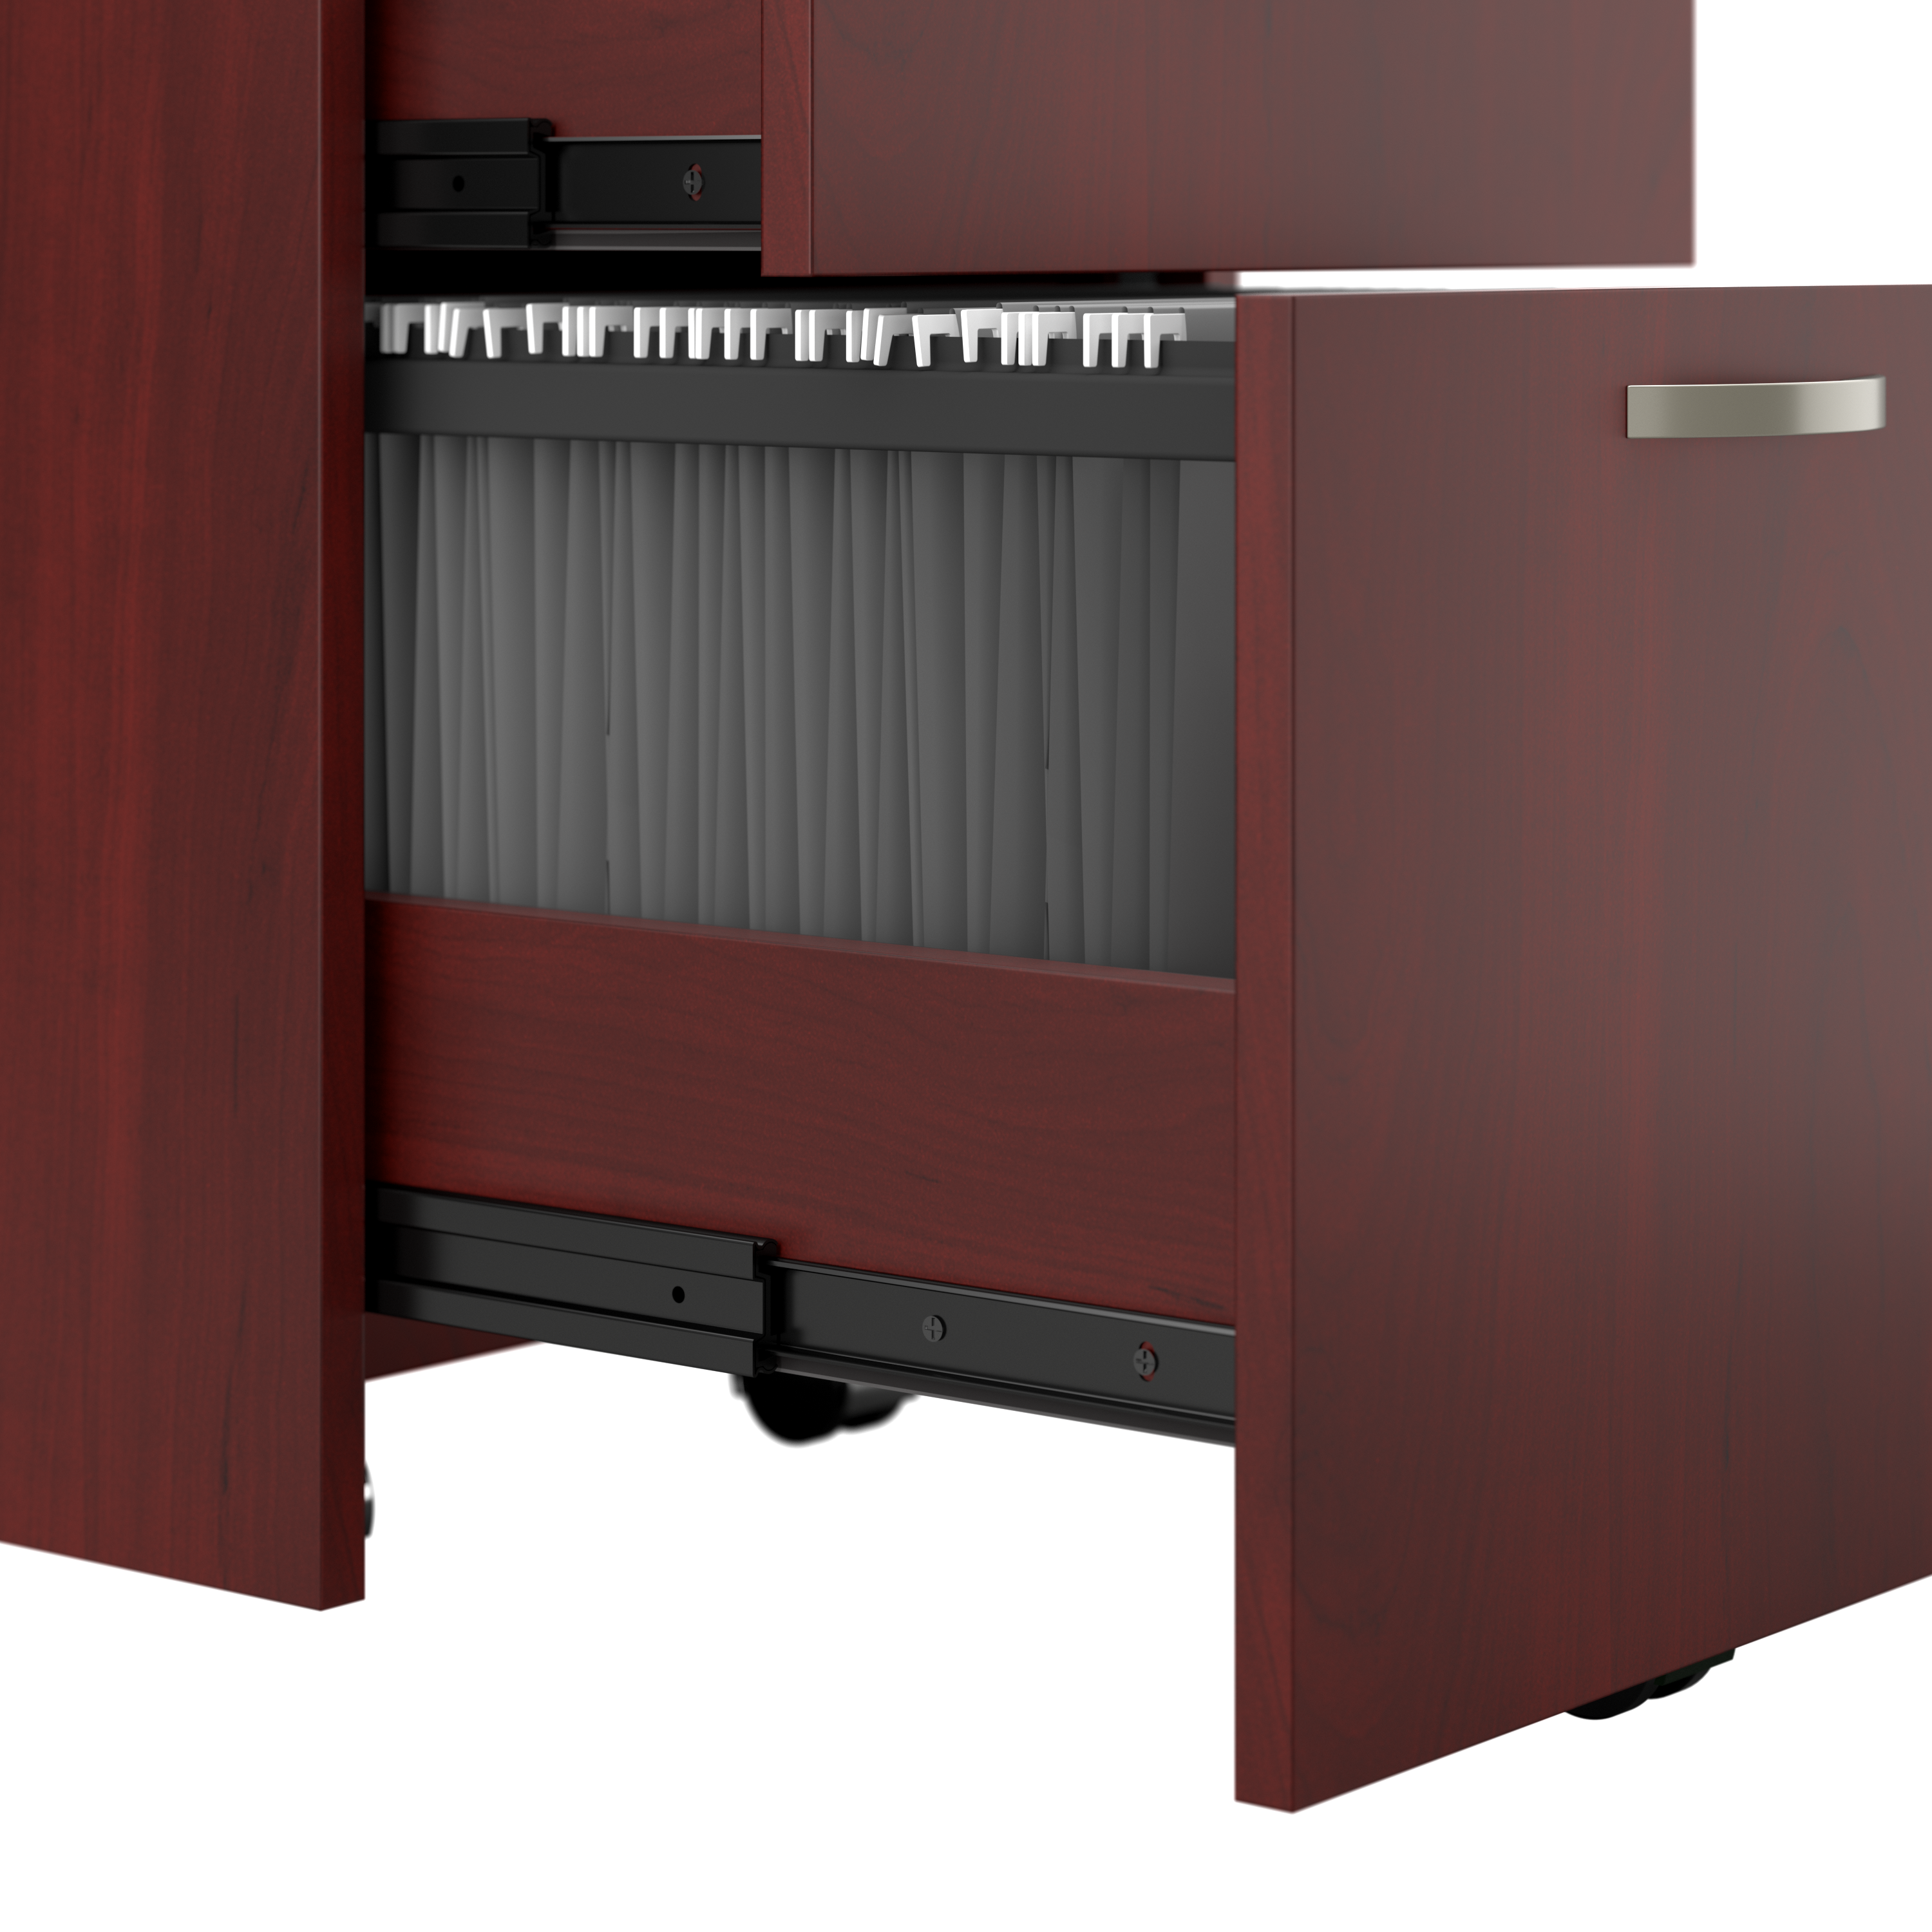 Shop Bush Business Furniture Office in an Hour Cubicle Storage with Cabinet, Drawers, Paper Tray, and Pencil Holder 03 WC36490-03K #color_hansen cherry